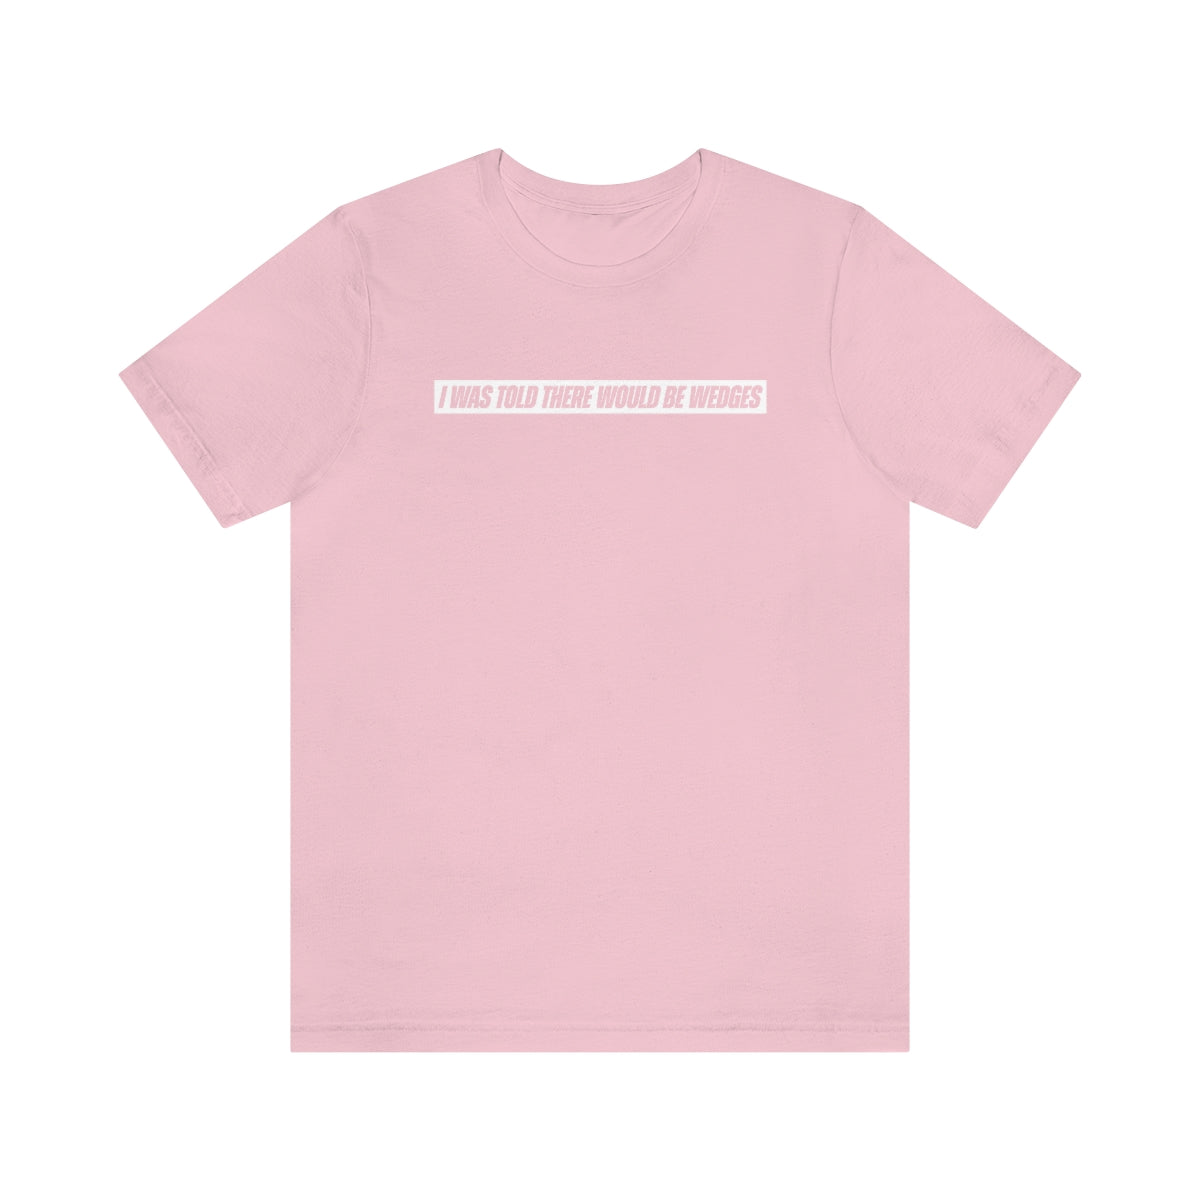 I Was Told There Would Be Wedges Repeat Tee 